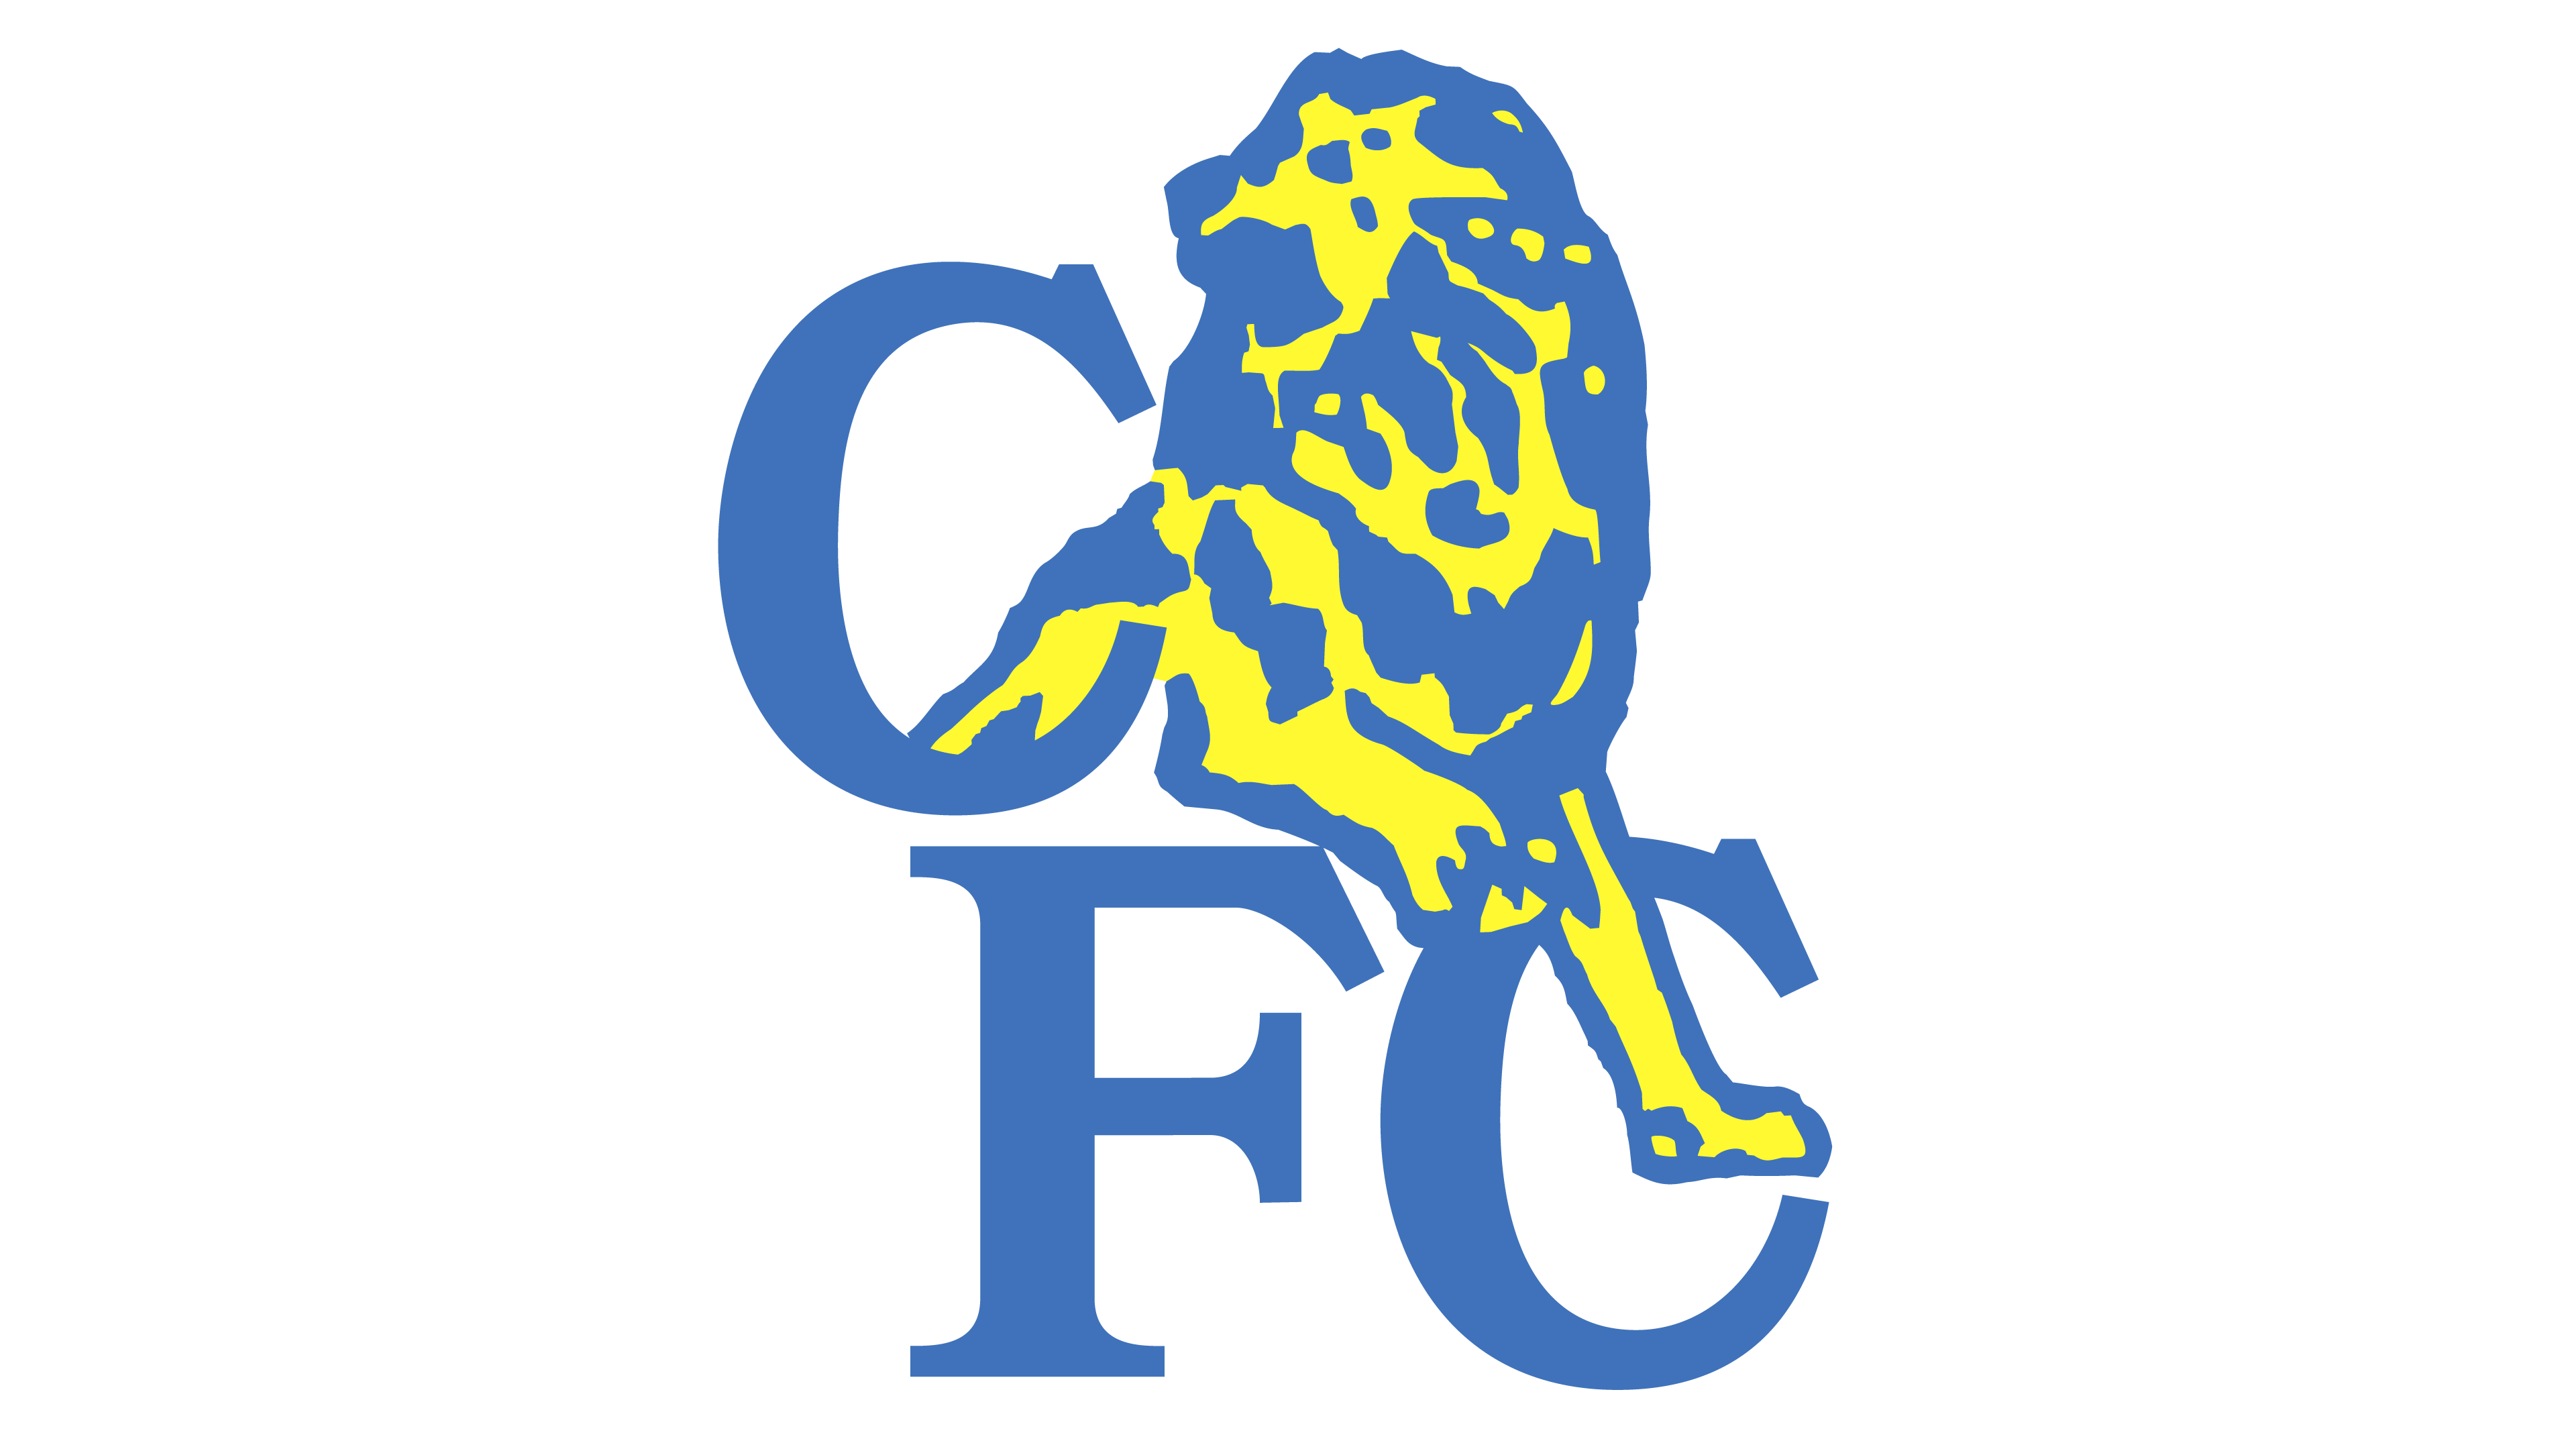 FC Logo - Chelsea logo - Interesting History of the Team Name and emblem